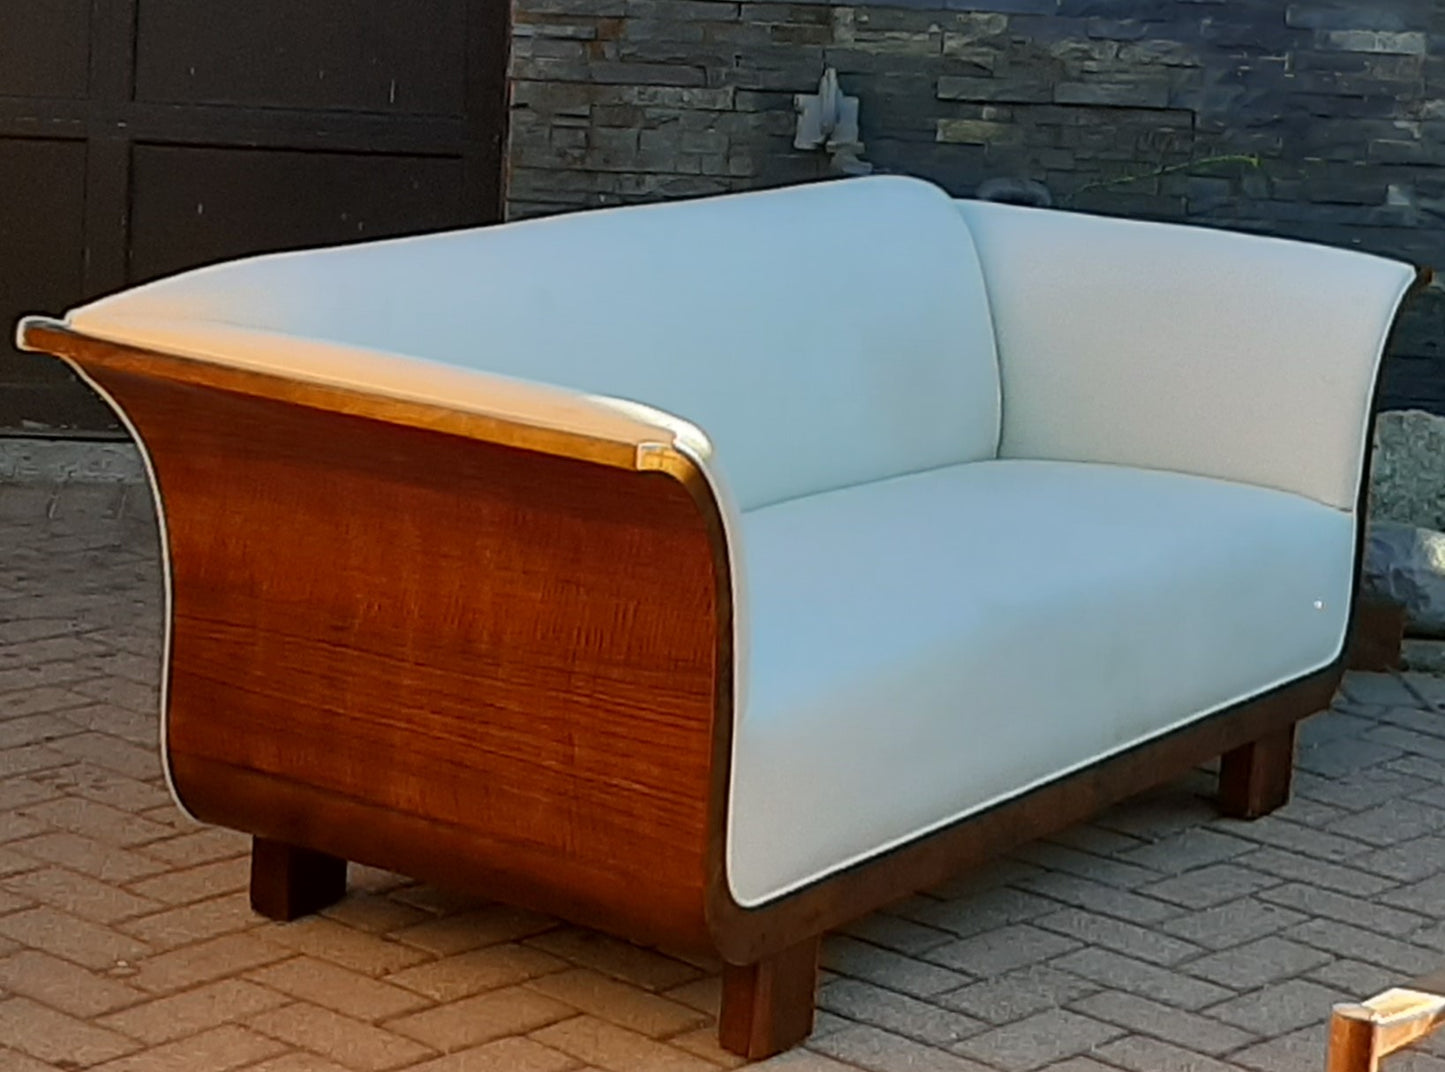 Danish Art Deco Sofa in style of Frits Henningsen for 1/5 th price!